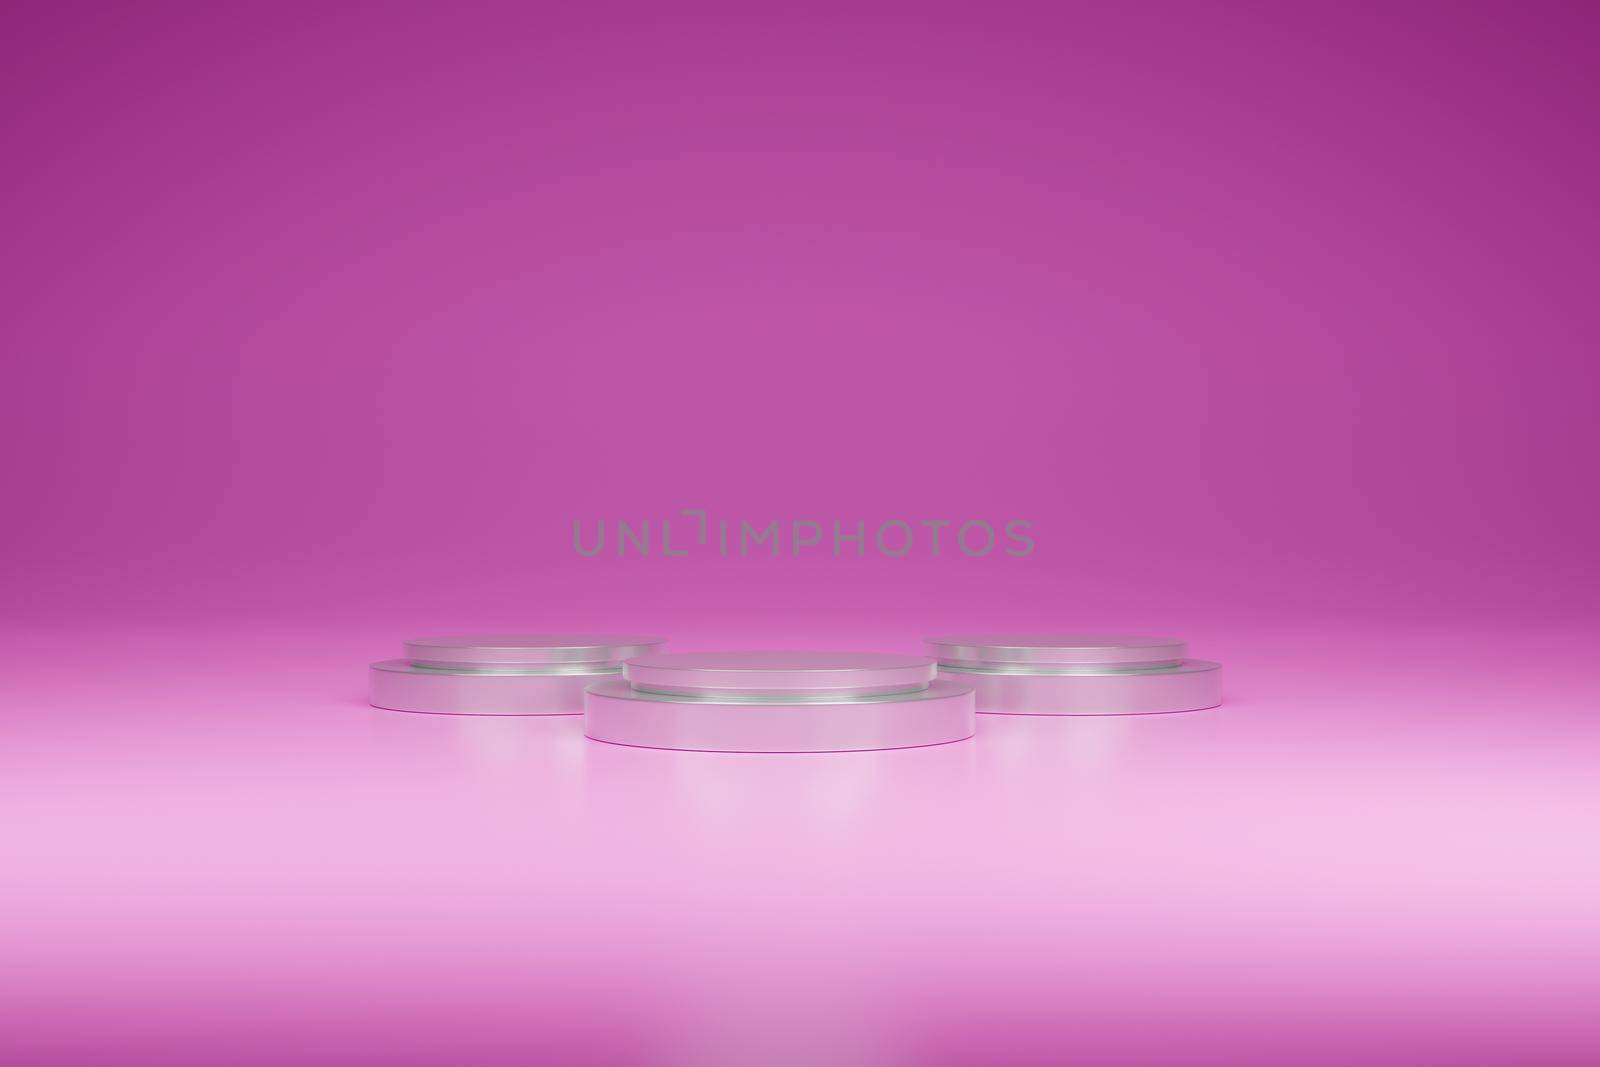 3 pieces white stainless podium 3D rendering on a pink background.show products. by thitimontoyai